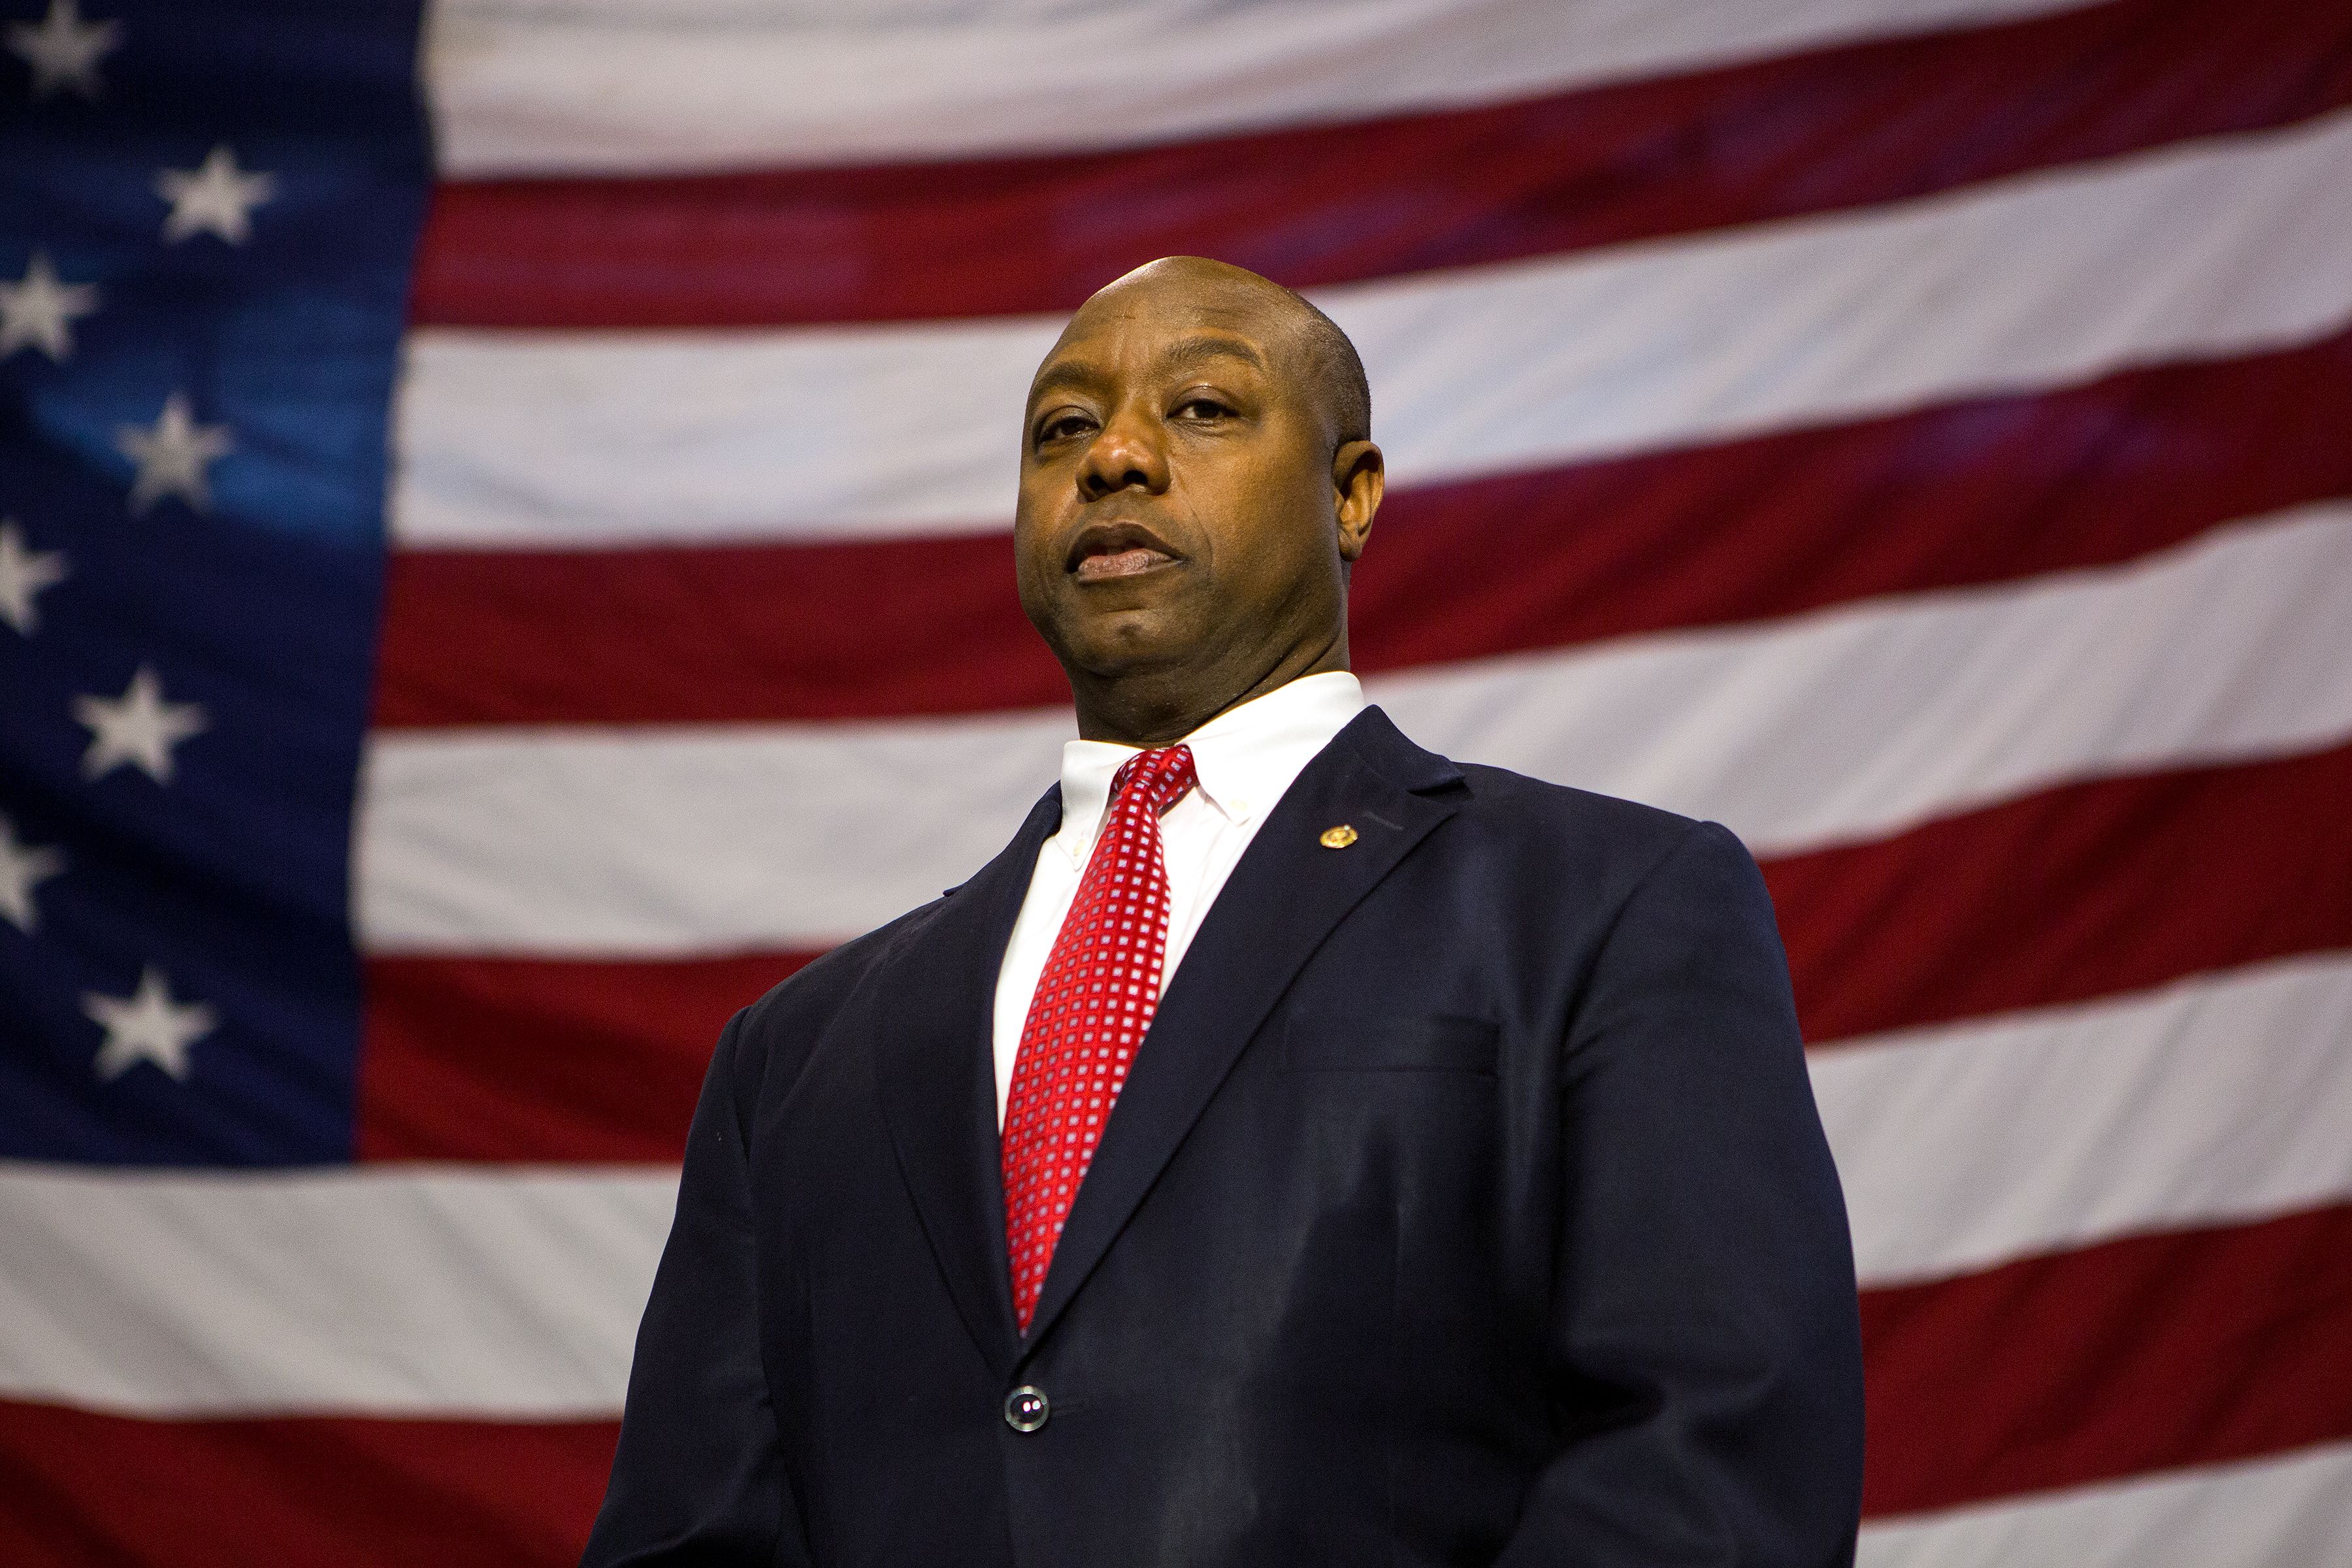 Tim Scott’s likability is fueling his rise. But how high can he climb? (cnn.com)